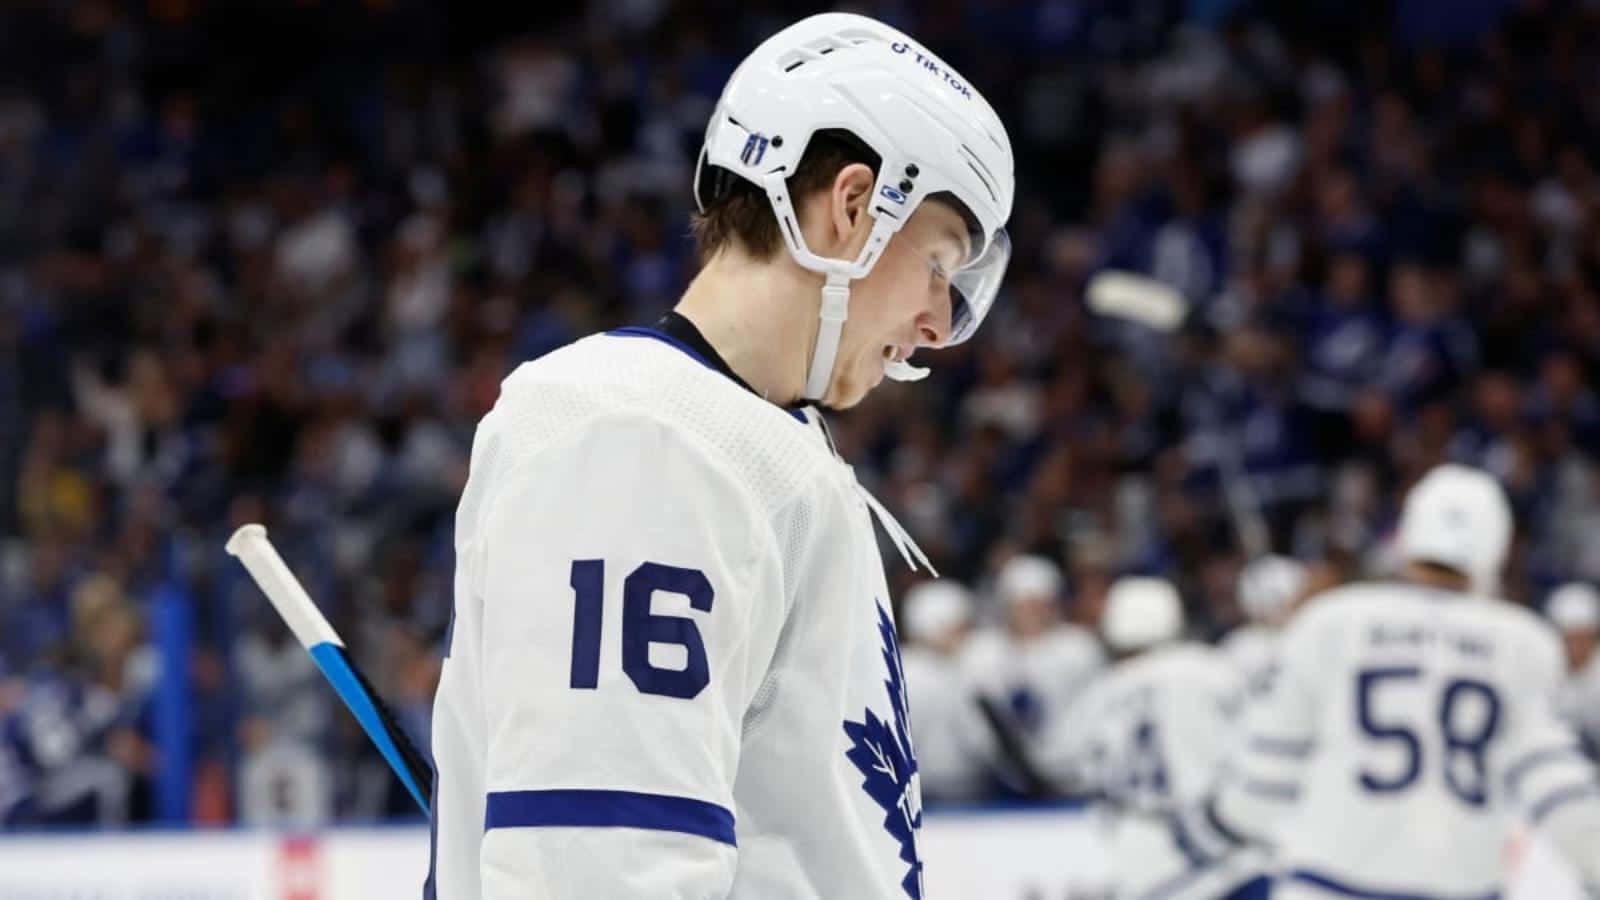 Mitch Marner Wallpapers - Wallpaper Cave